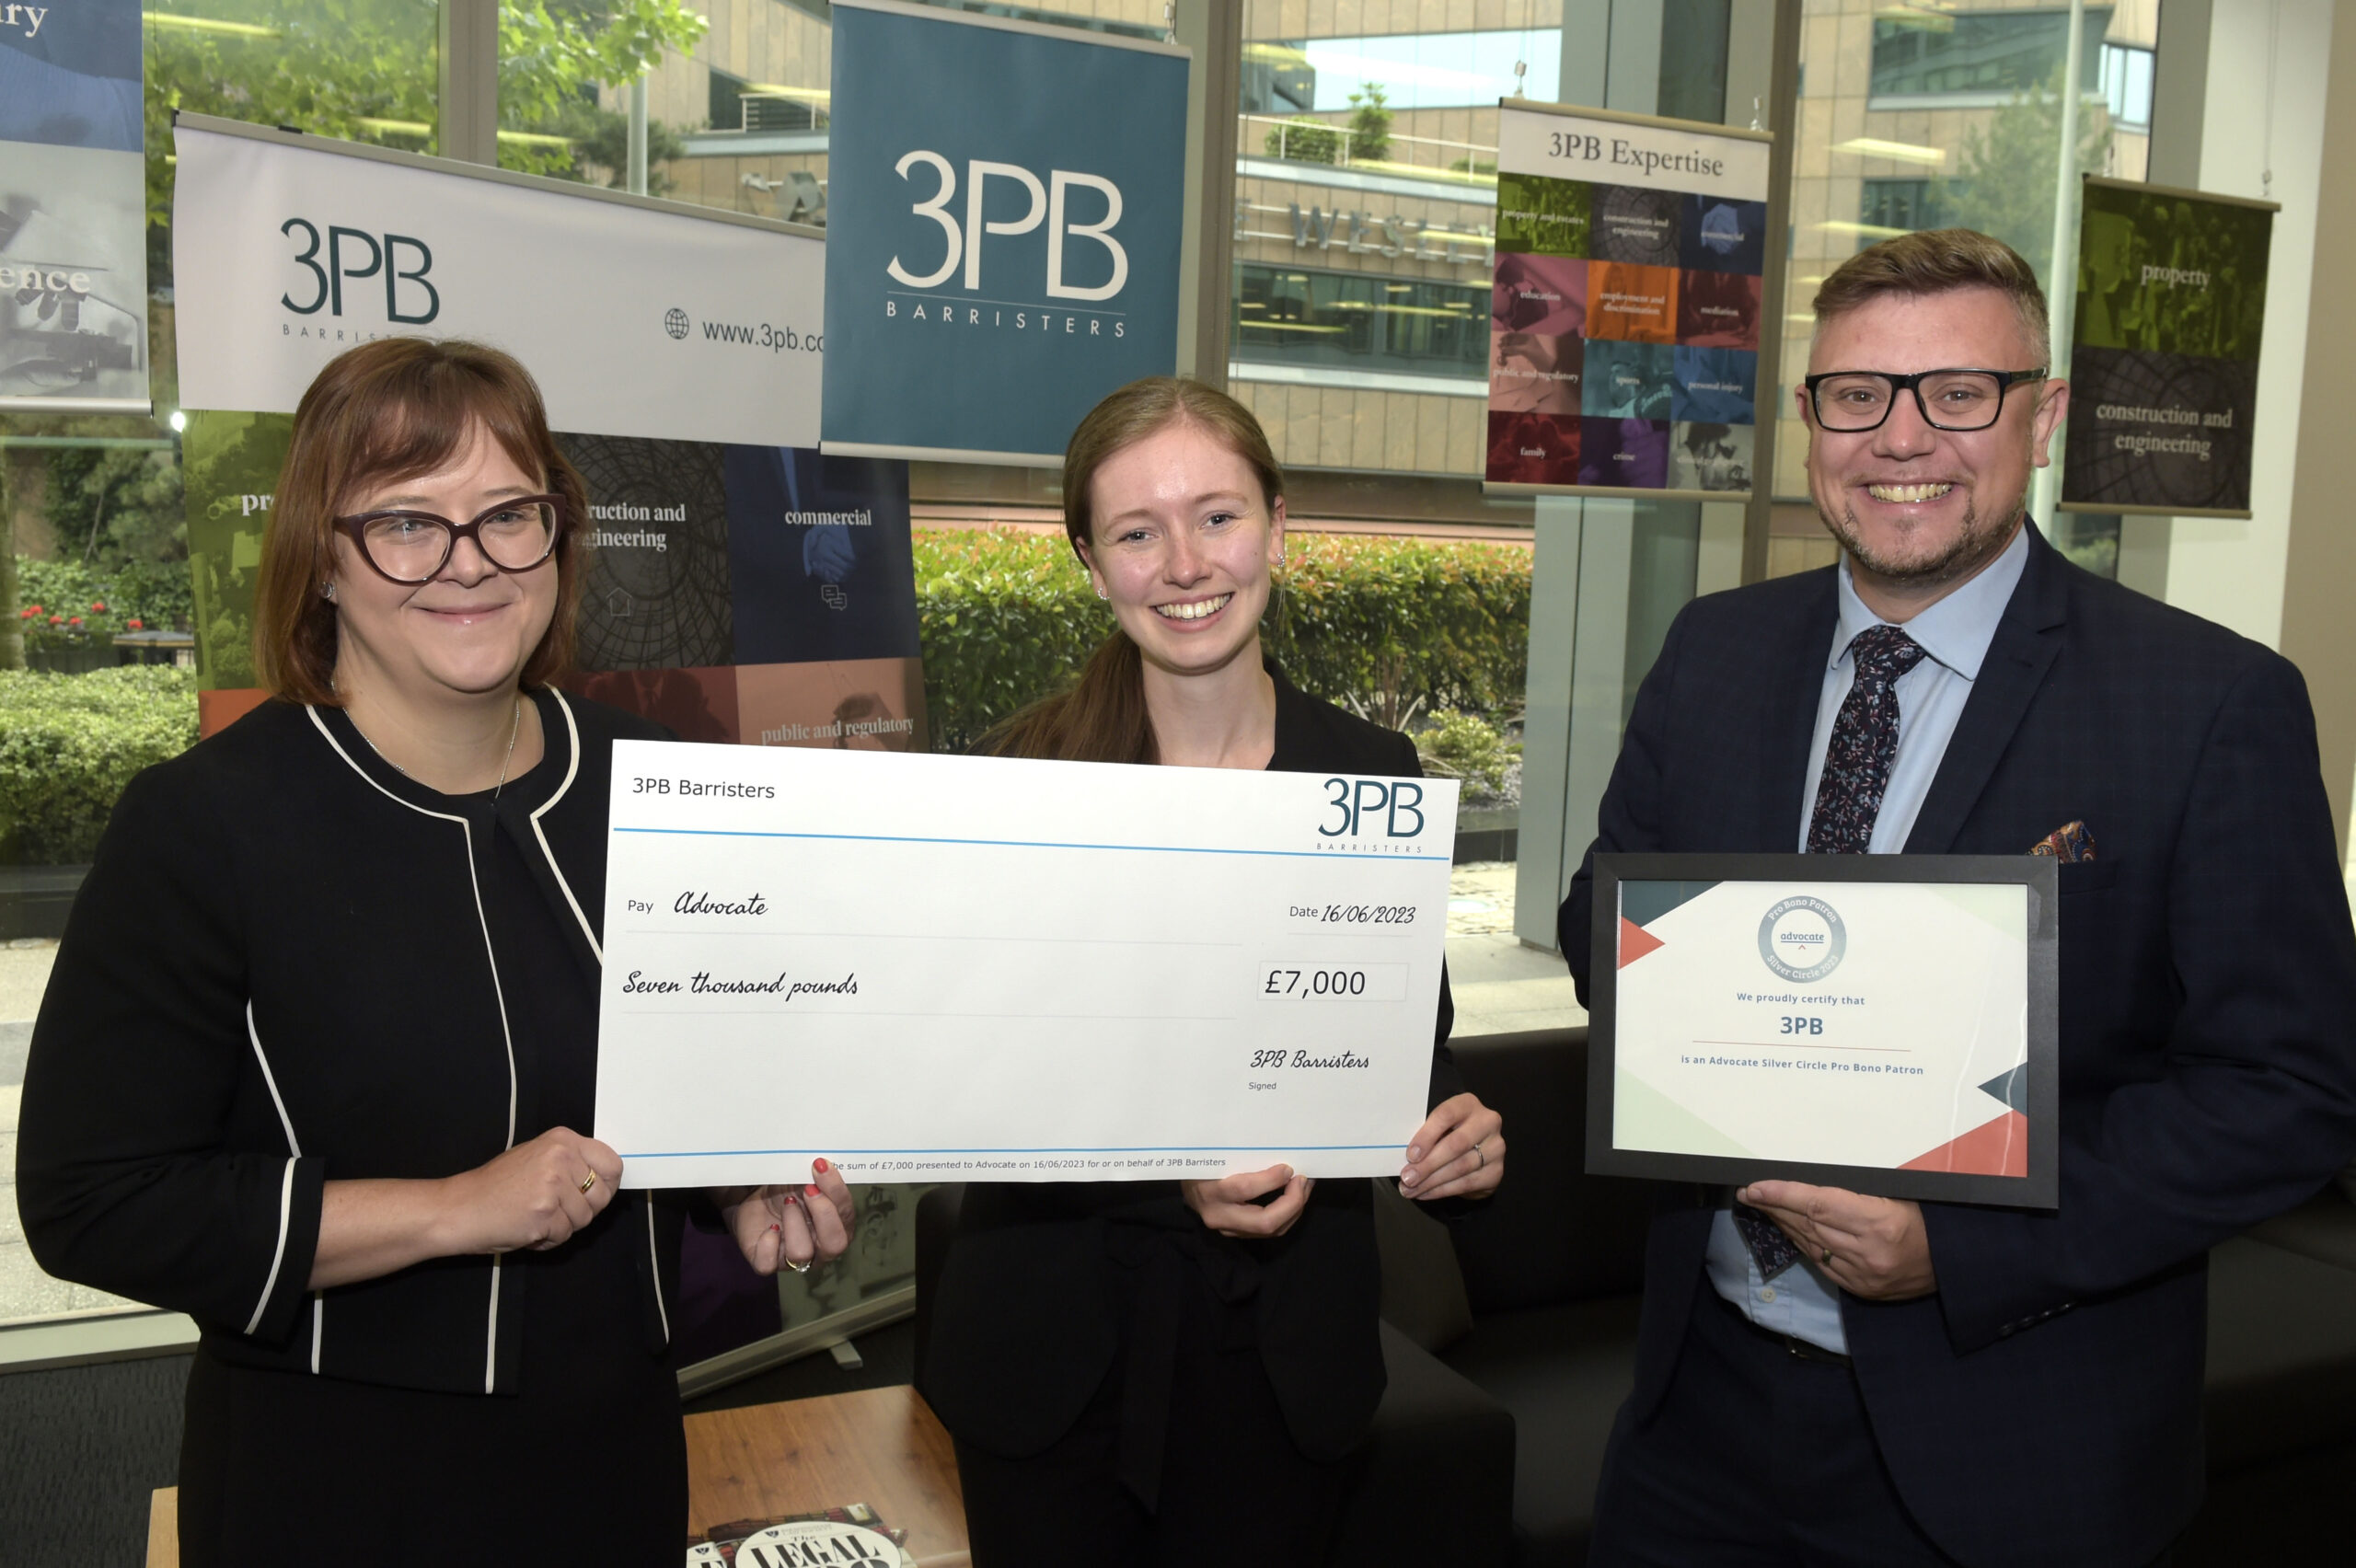 Rachel Bloxwich (3PB), Charlotte Green (Advocate) and Ian Charlton (3PB) hand over the donation and mark 3PB’s admittance as Silver Patrons